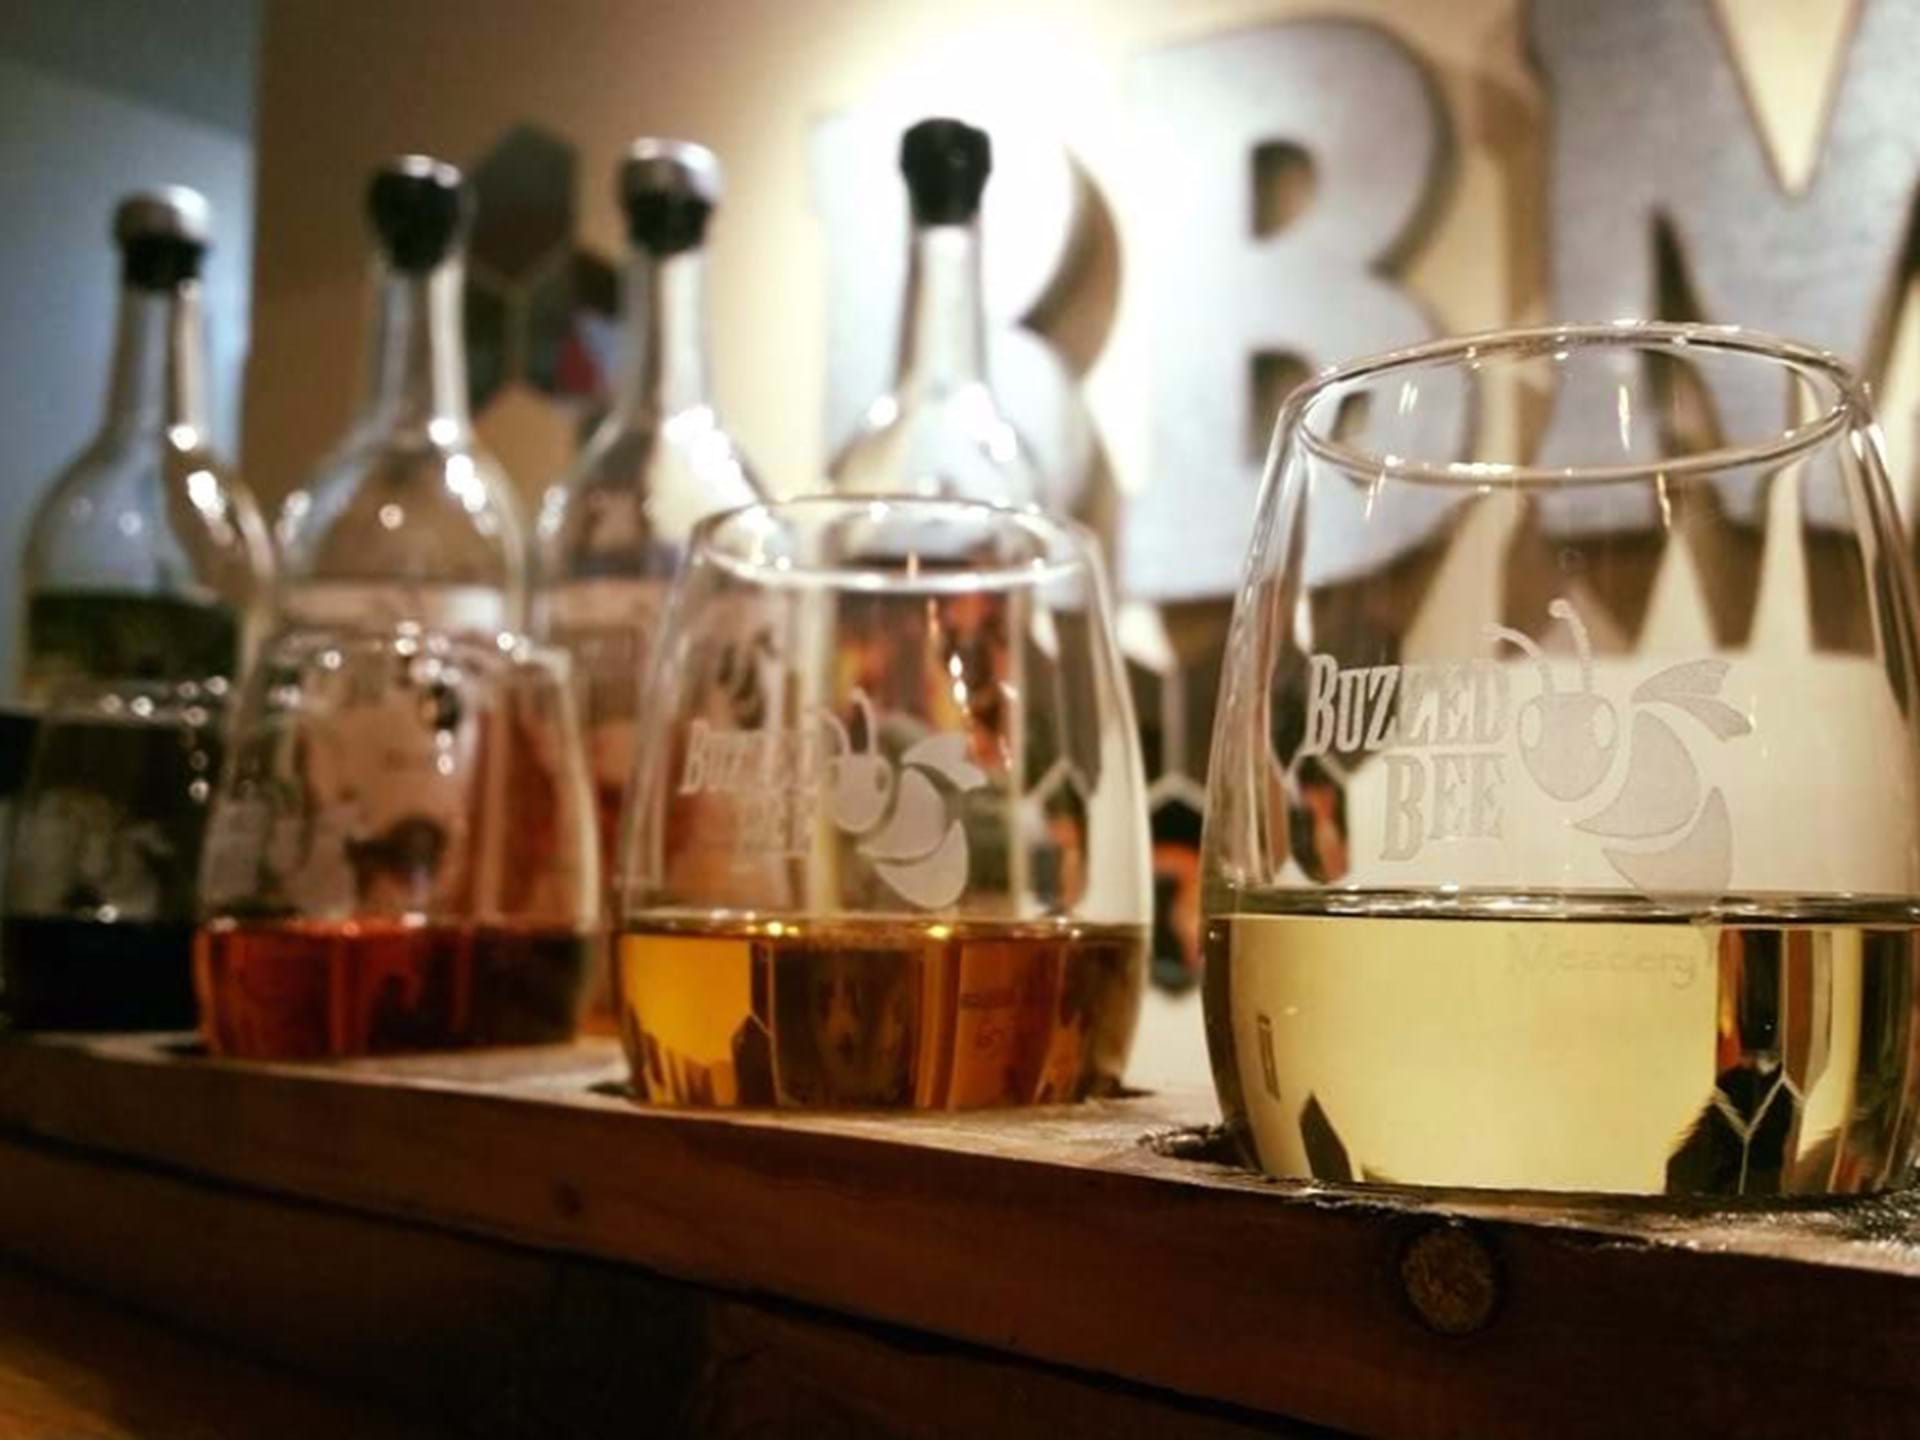 Join us for a Mead tasting